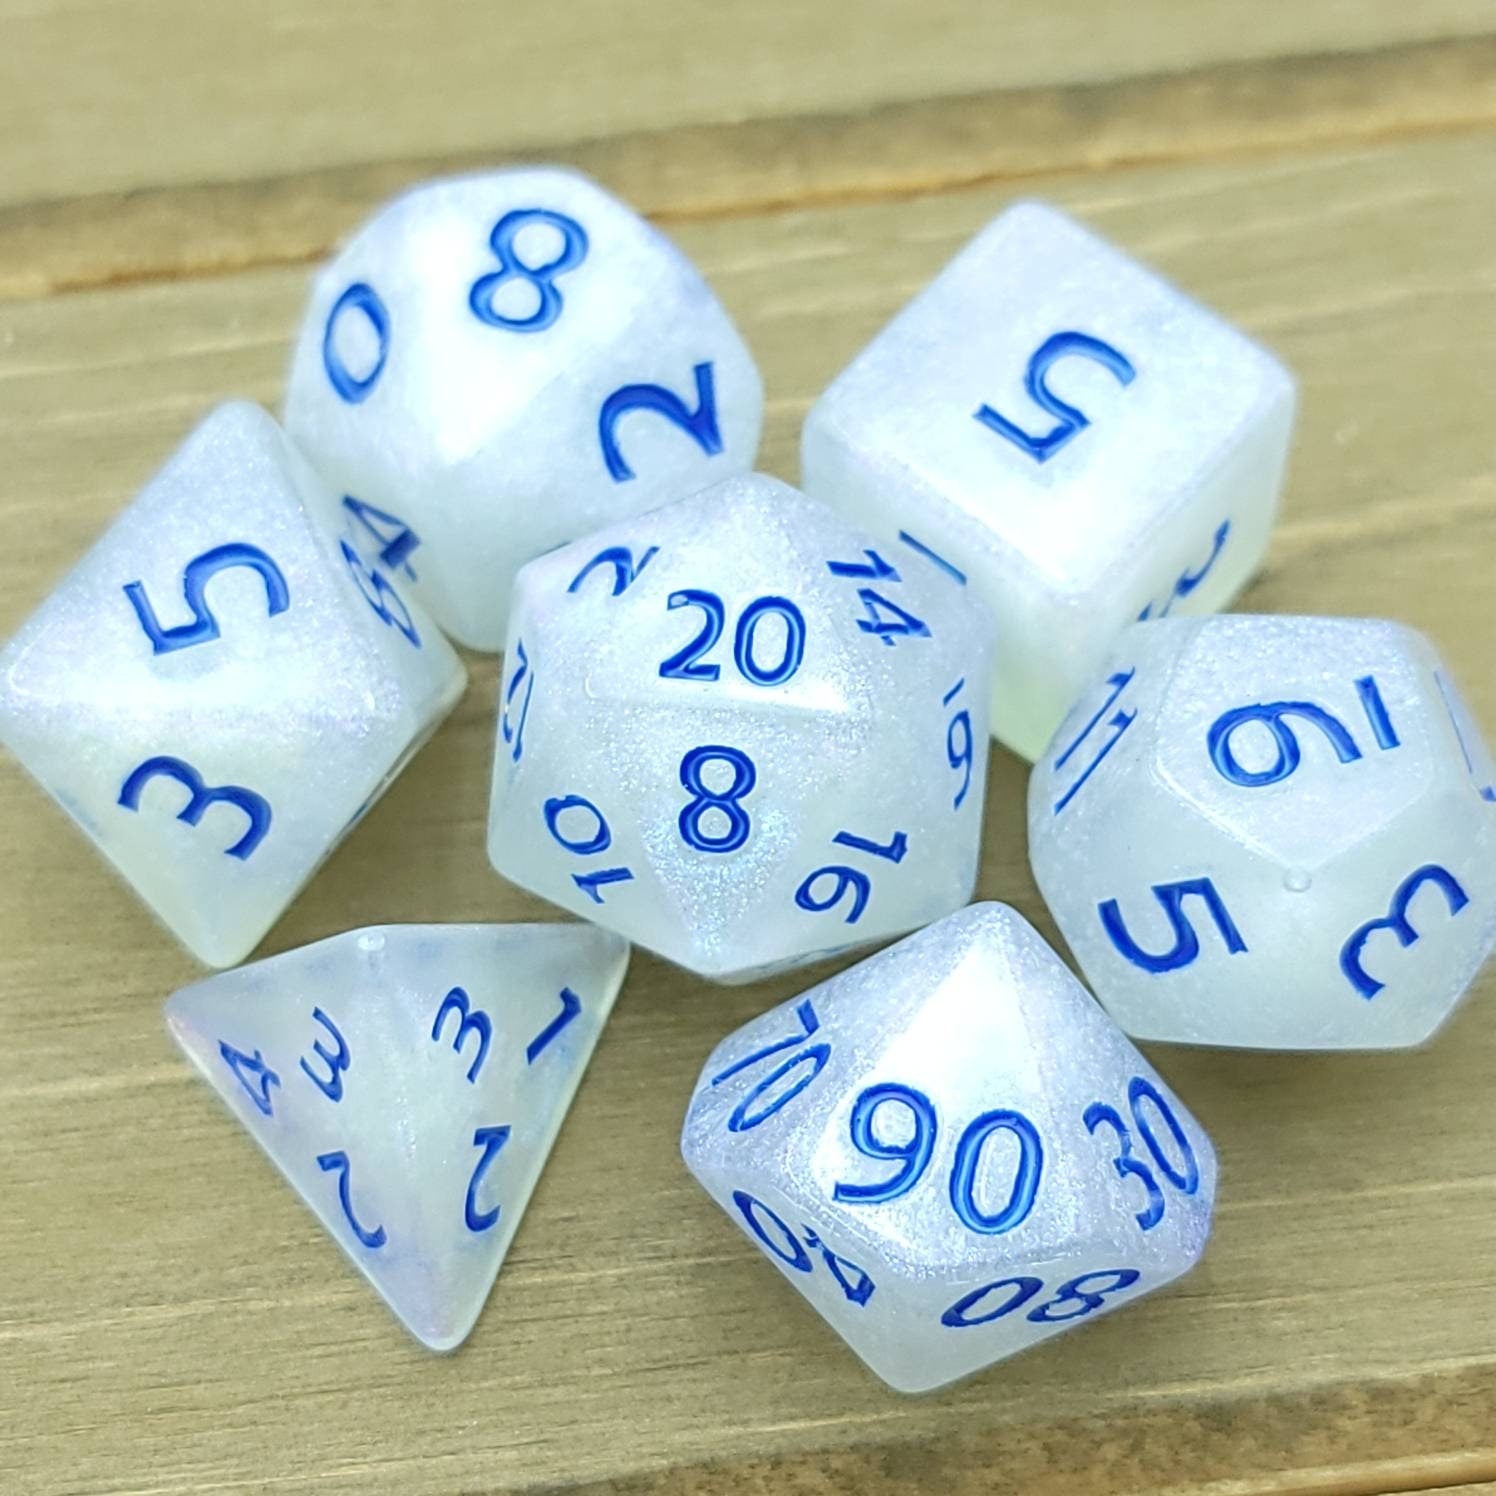 Opalescence | RPG Dice Set| RPG Dice | Polyhedral Dice Set | Dungeons and Dragons | DnD Dice Set | Gaming Dice Set